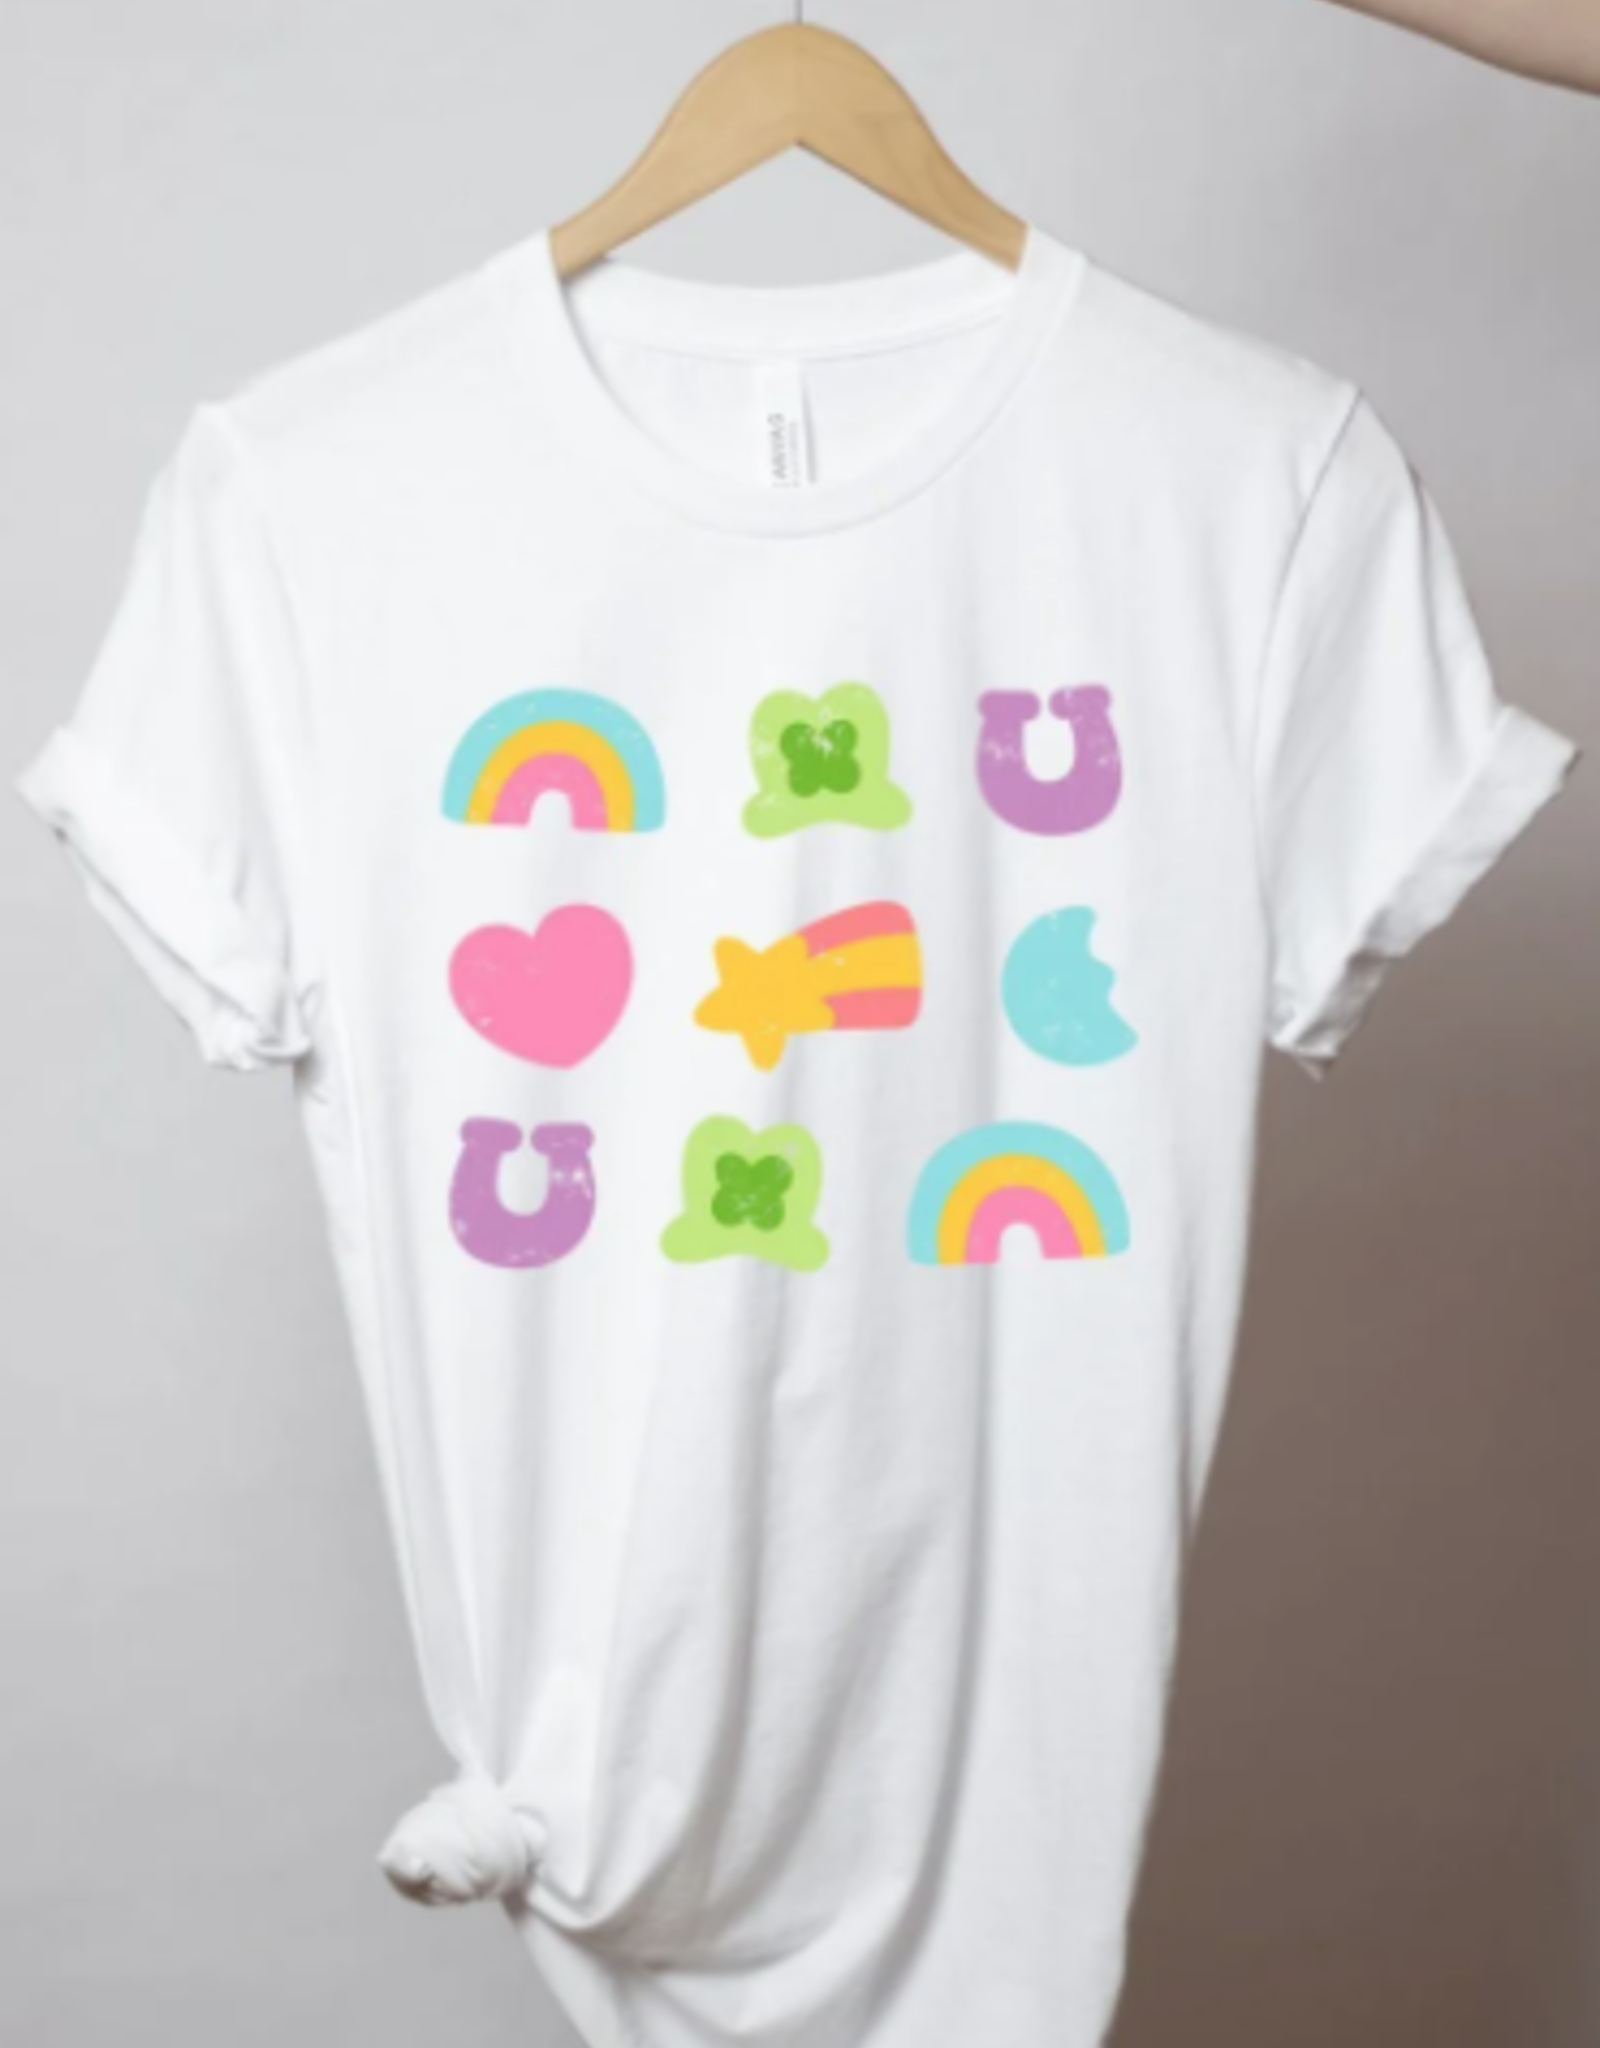 SHIRT WMS "LUCKY CHARMS" WHITE